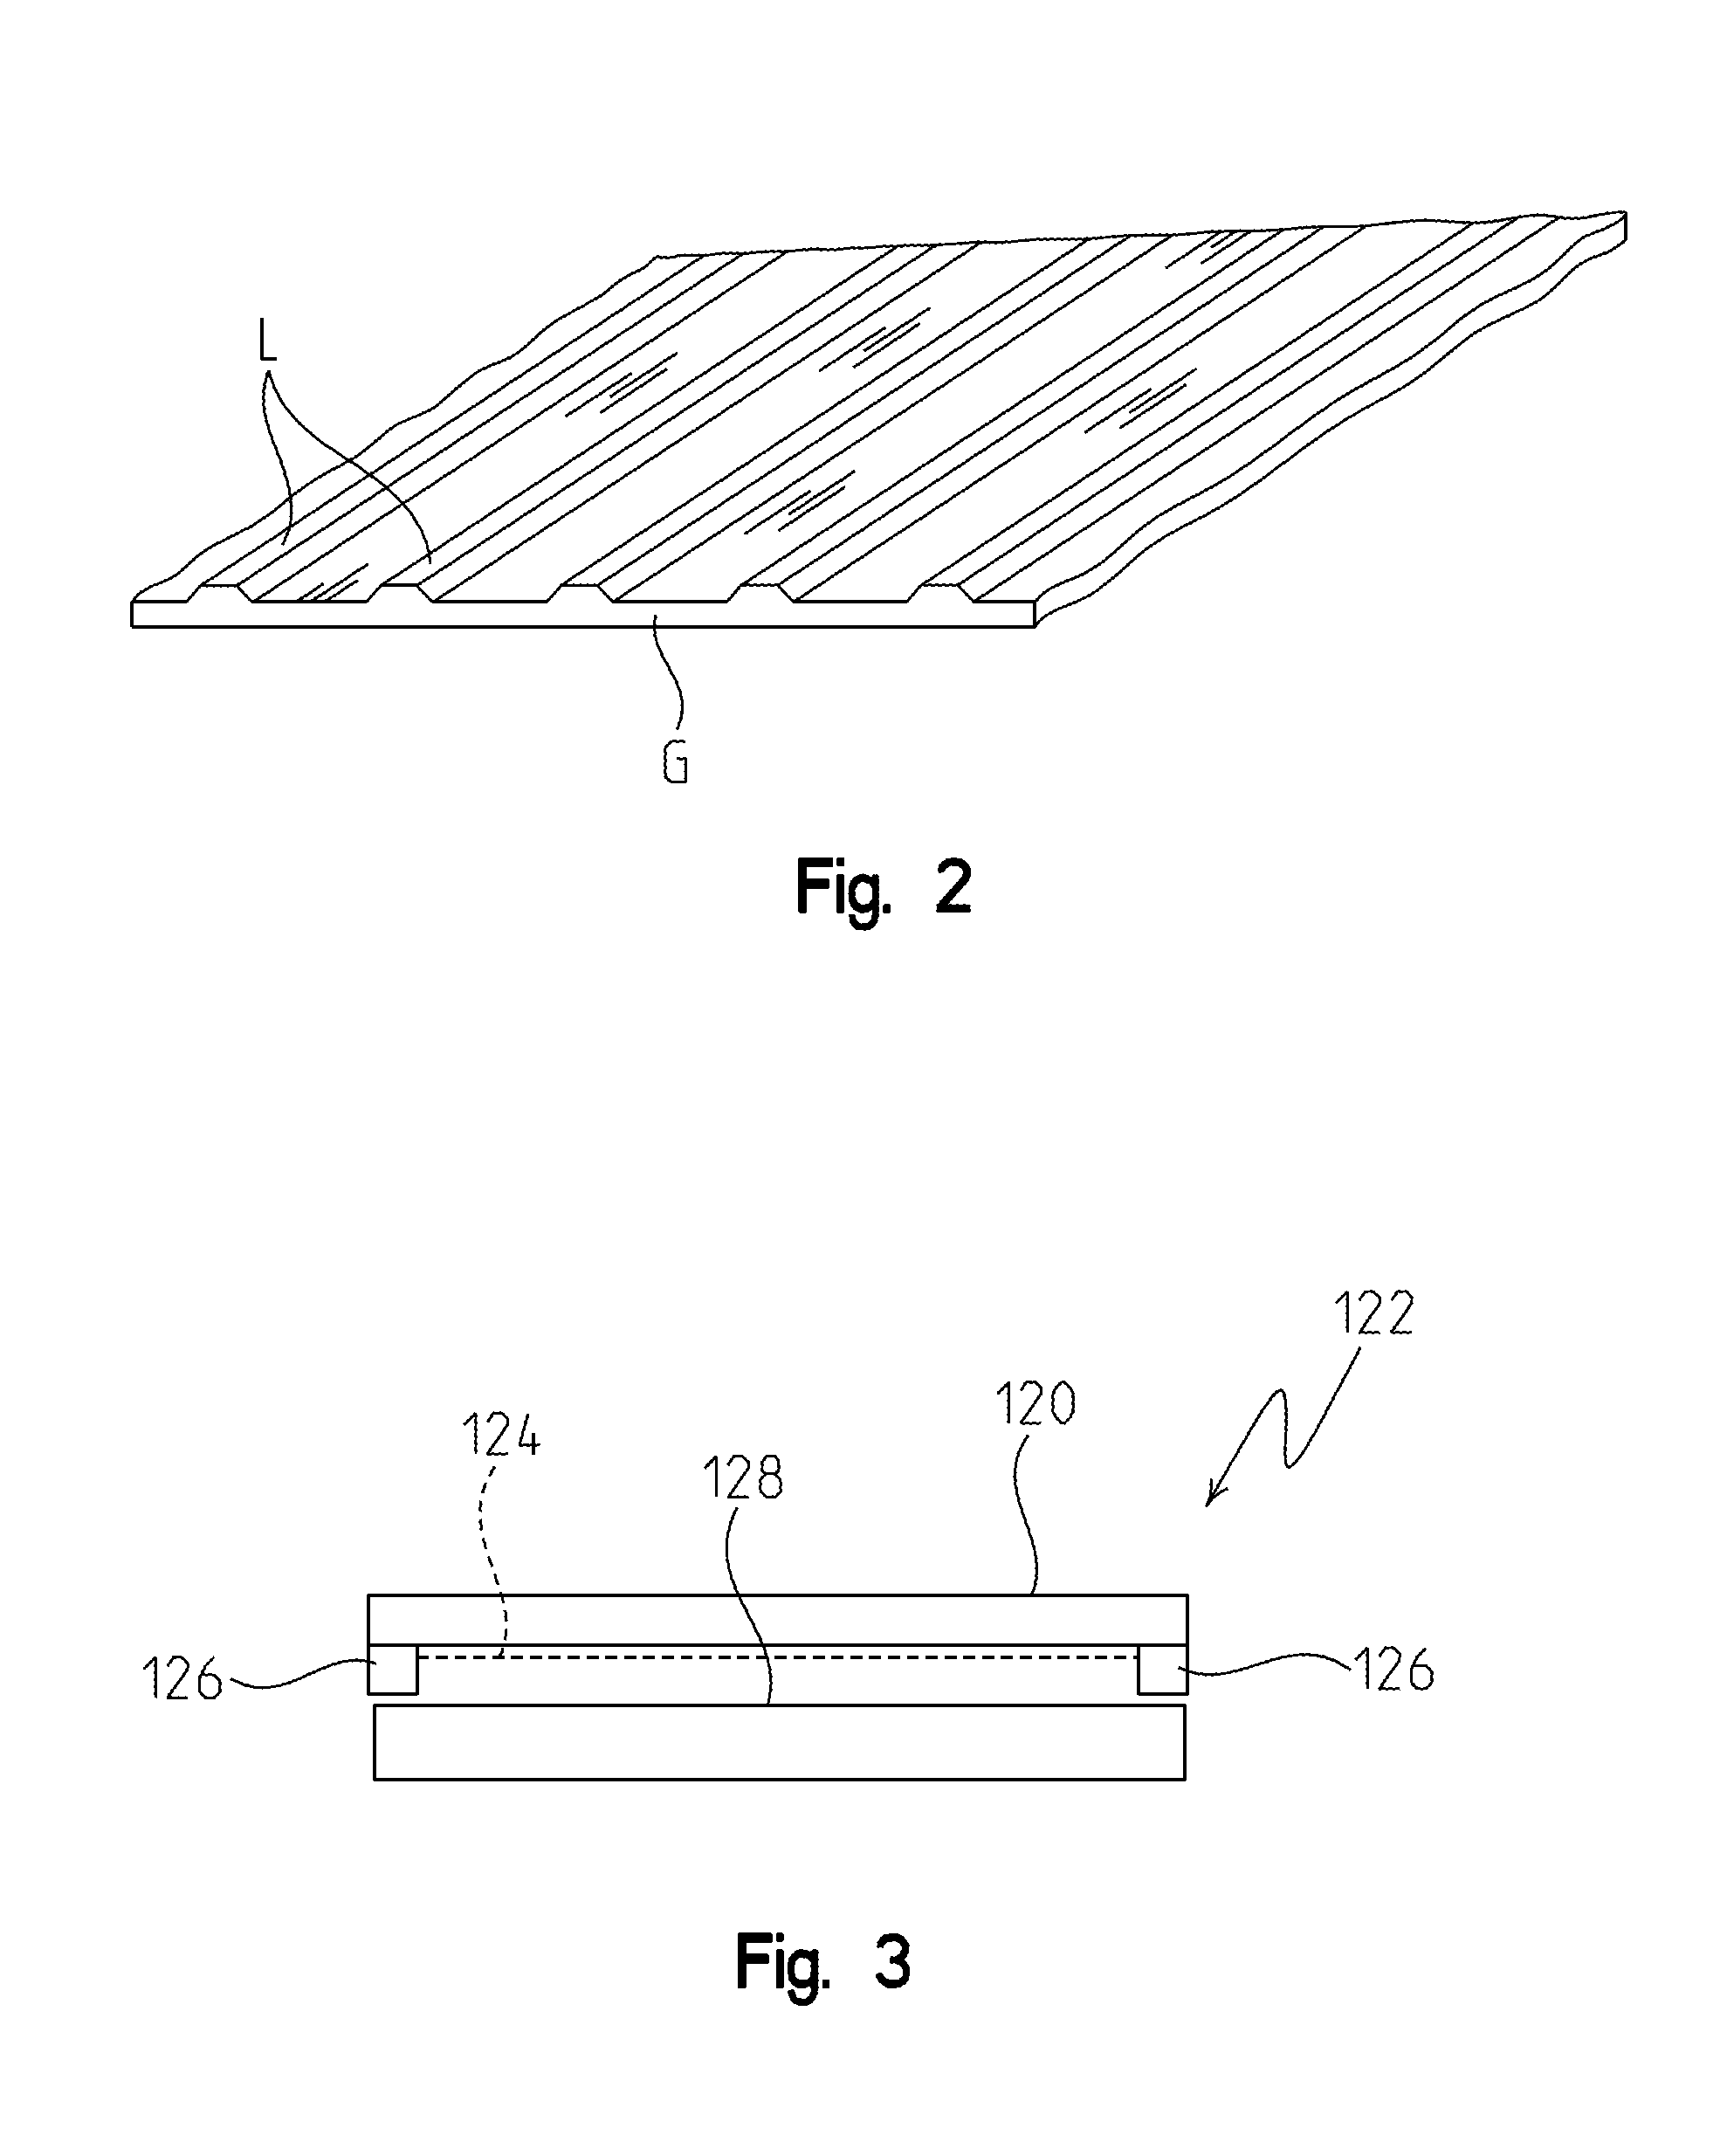 Three-dimensional imaging system using a single lens system